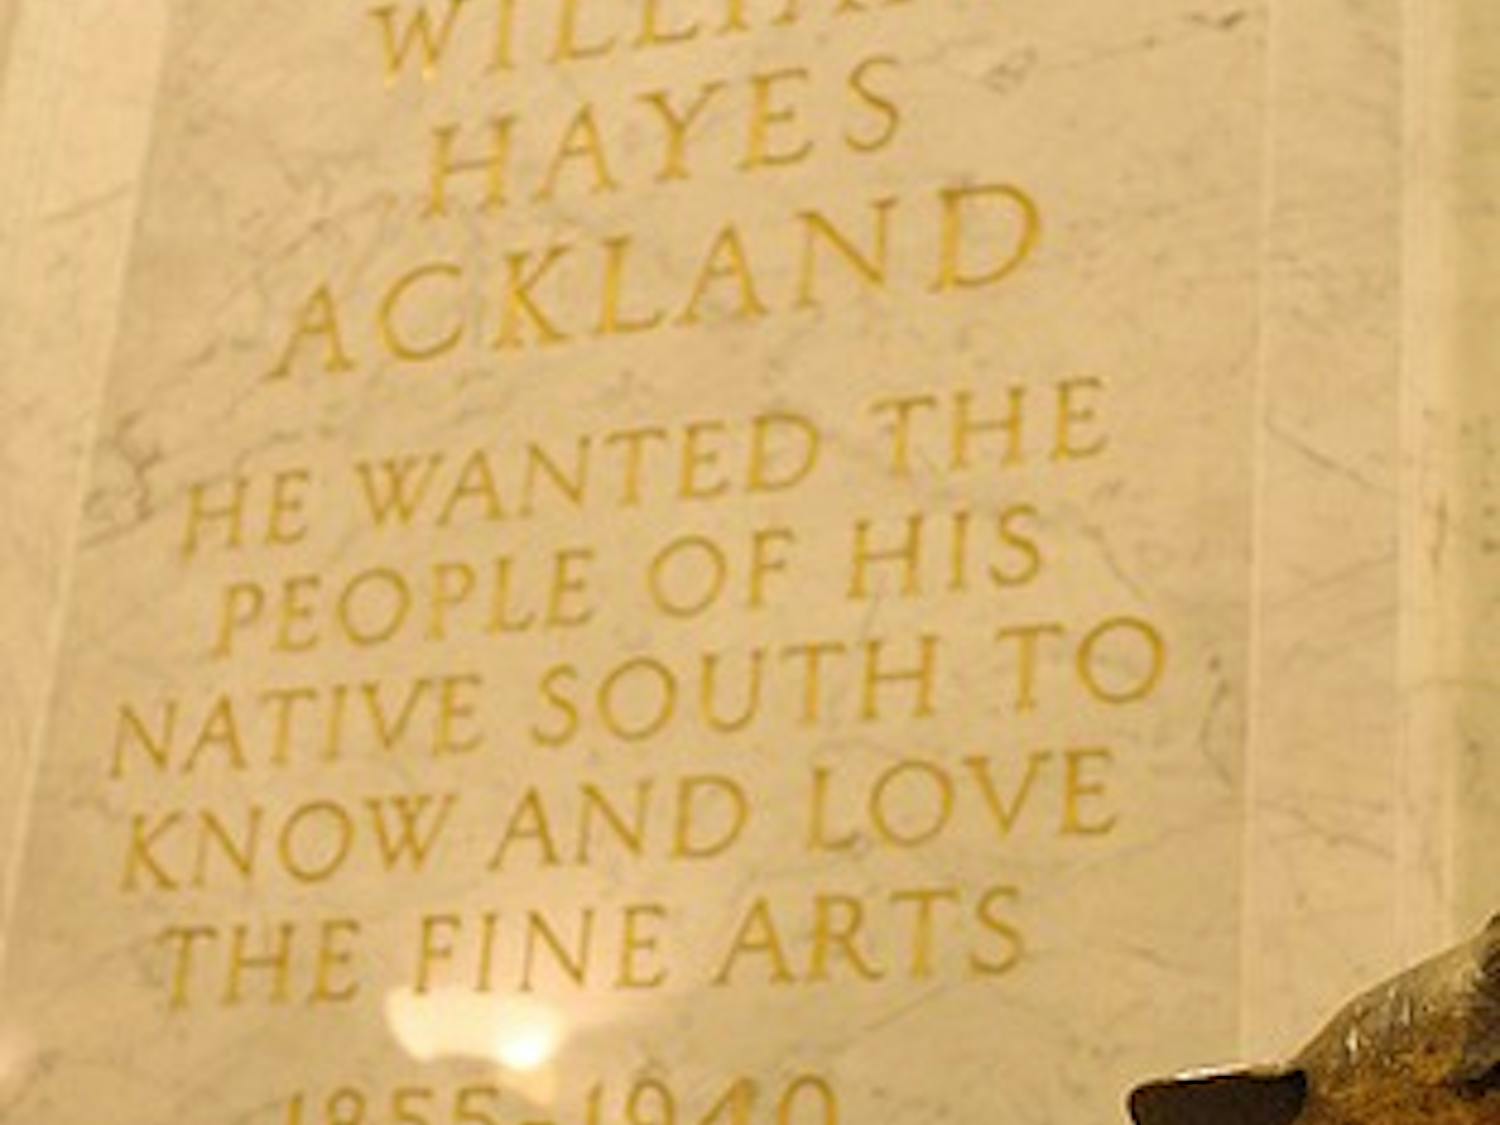 The Ackland Art Museum was founded through the  bequest of William Hayes Ackland. Mr. Ackland died in 1940, he originally left his bequest to Duke University. Duke's trustees refused the bequest and so it was given to UNC, which Ackland had also considered before he died.